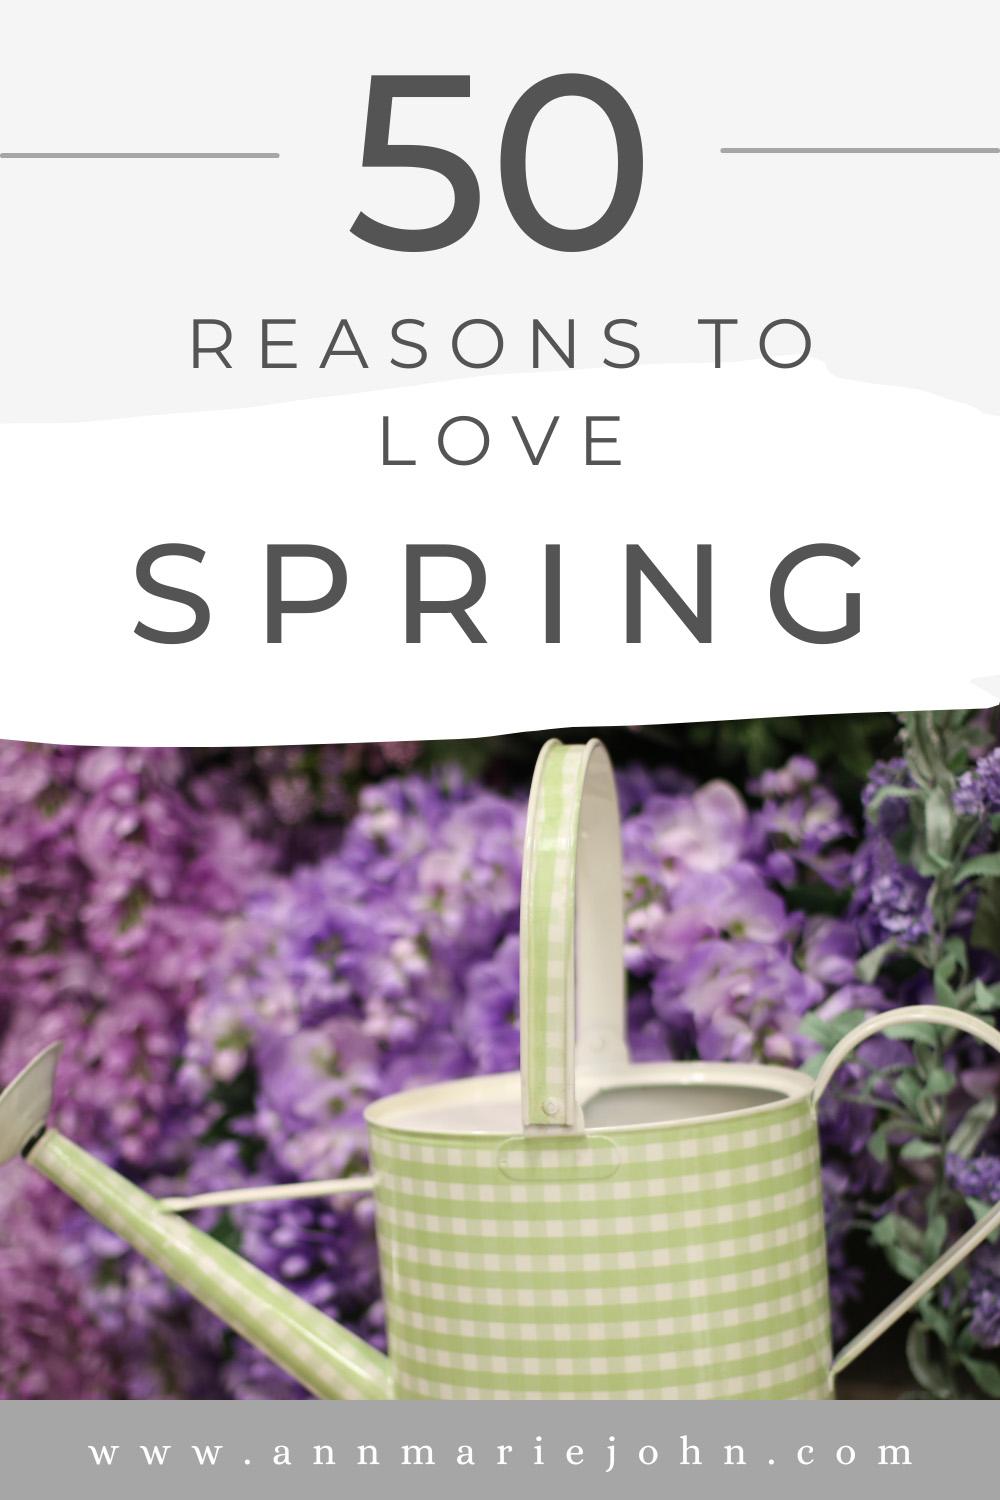 50 Reasons to Love Spring